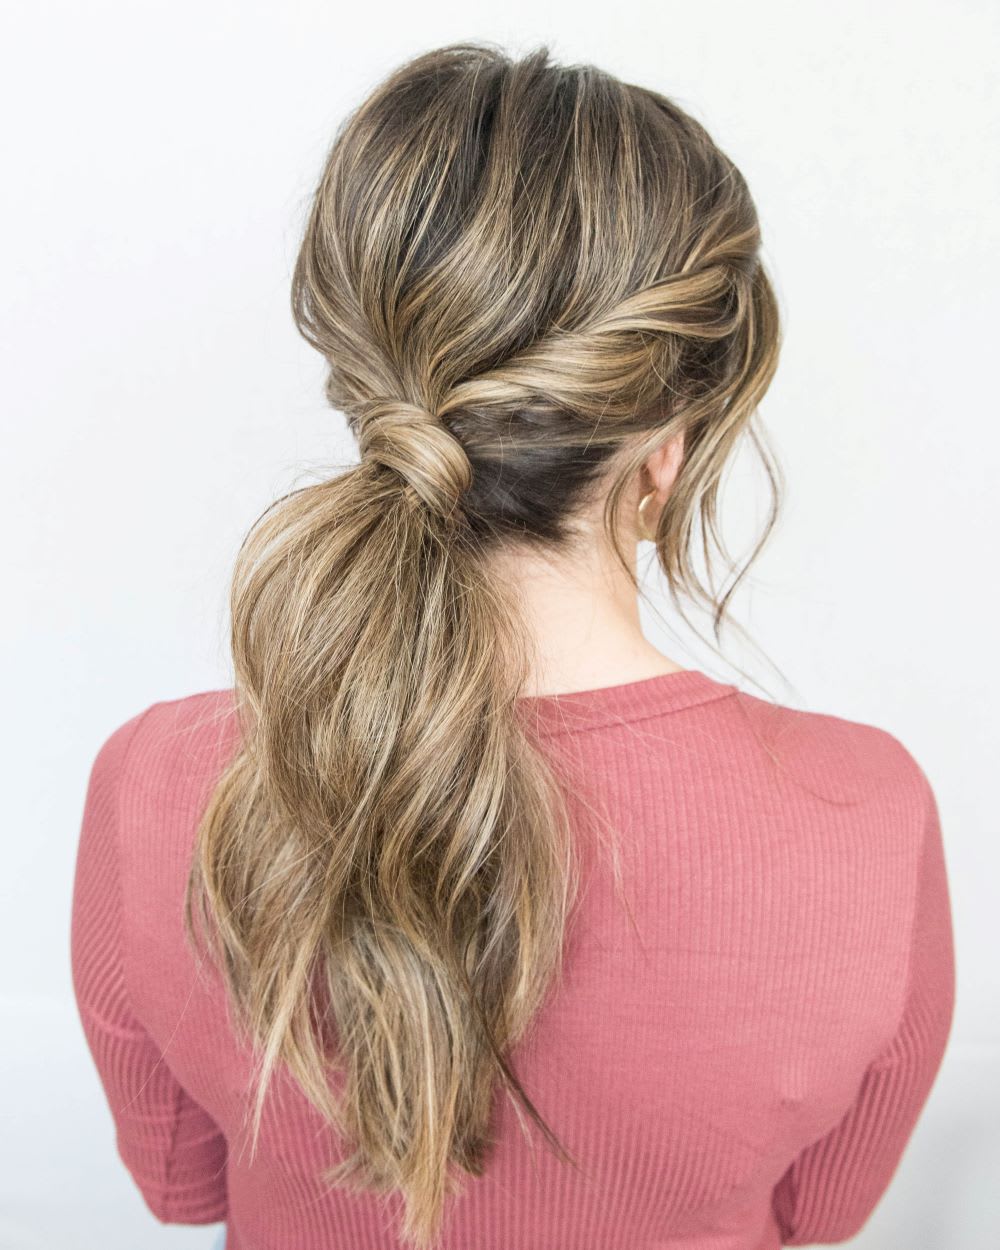 11 Beautiful Ponytail Hairstyles for the Fashionable Ladies